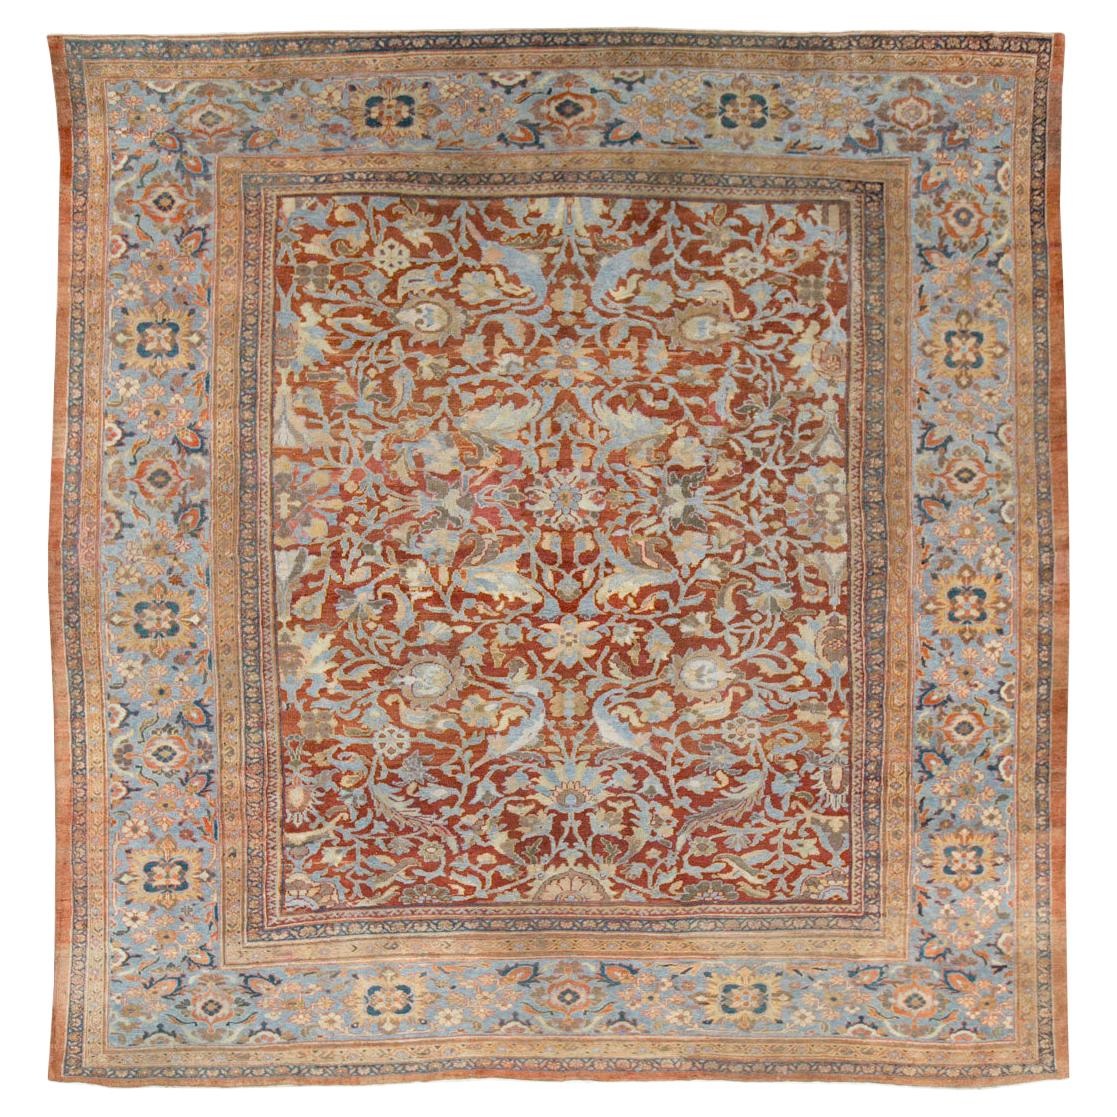 Early 20th Century Handmade Persian Sultanabad Large Square Room Size Carpet